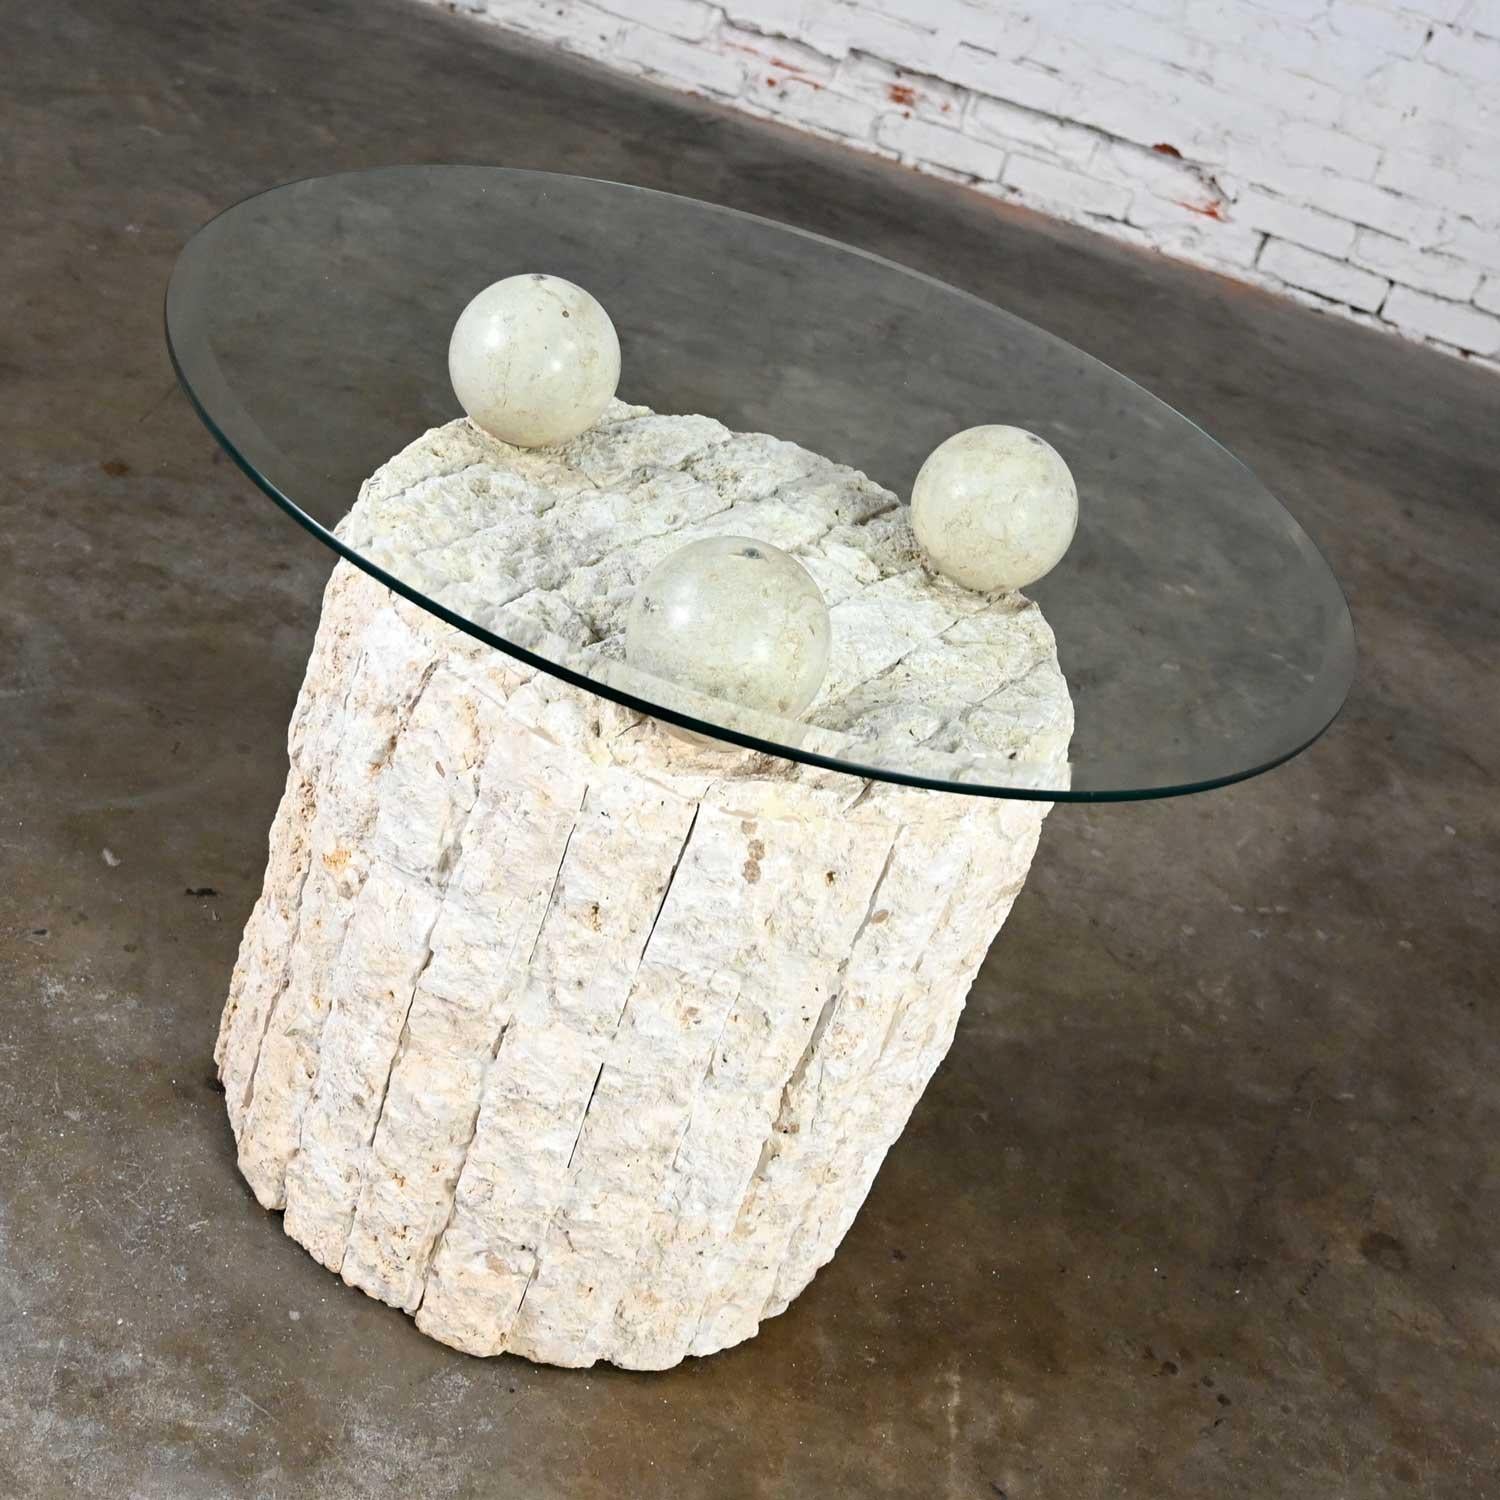 Fabulous postmodern tessellated Mactan rough edge stone round pedestal base side table with 3 polished spheres and a round beveled glass top in the style of Maitland Smith. Beautiful condition, keeping in mind that this is vintage and not new so